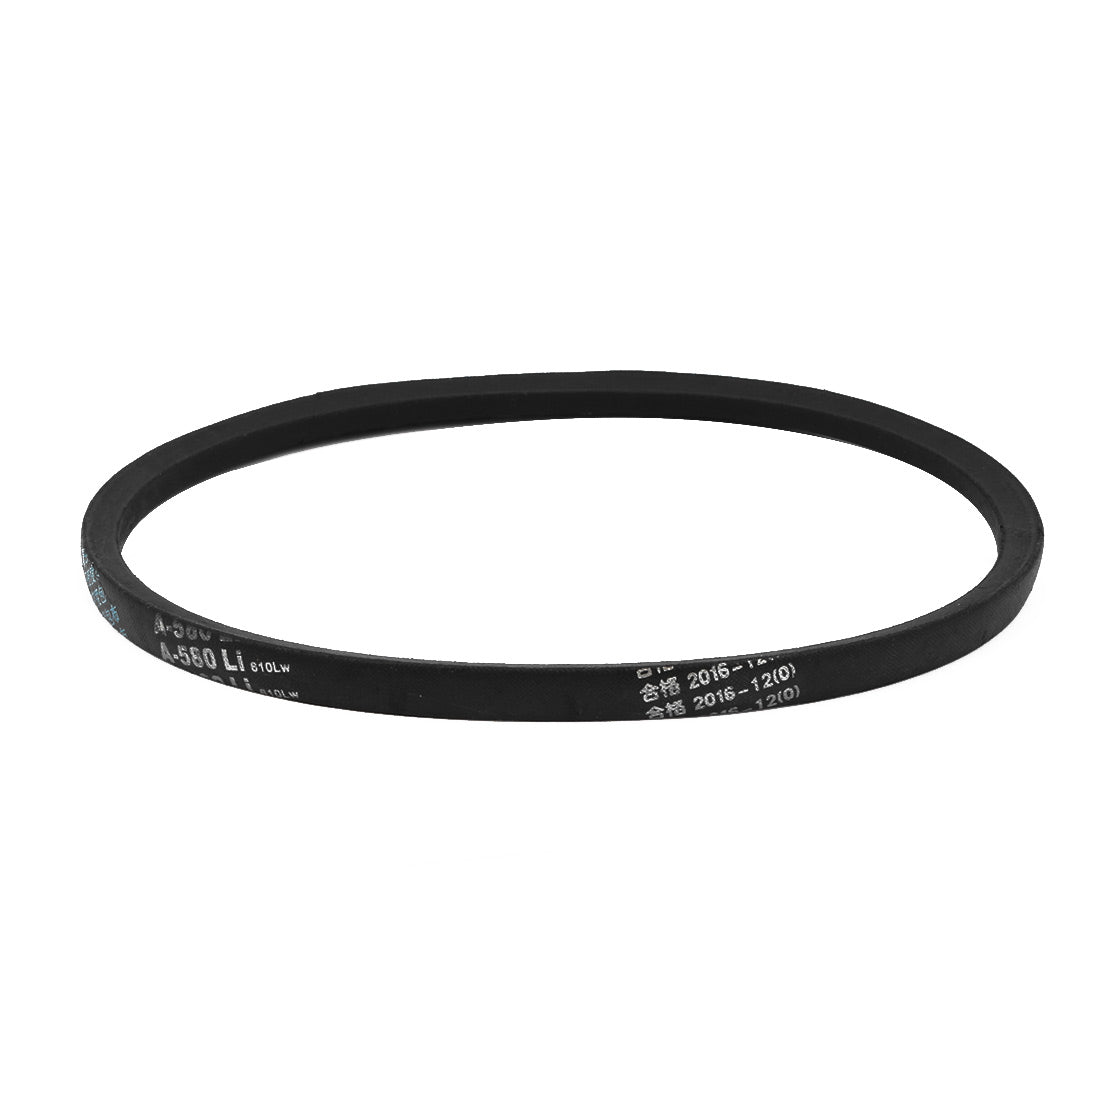 uxcell Uxcell A580 Rubber Transmission Drive Belt V-Belt 8mm Thick 580mm Inner Girth for Washing Machine